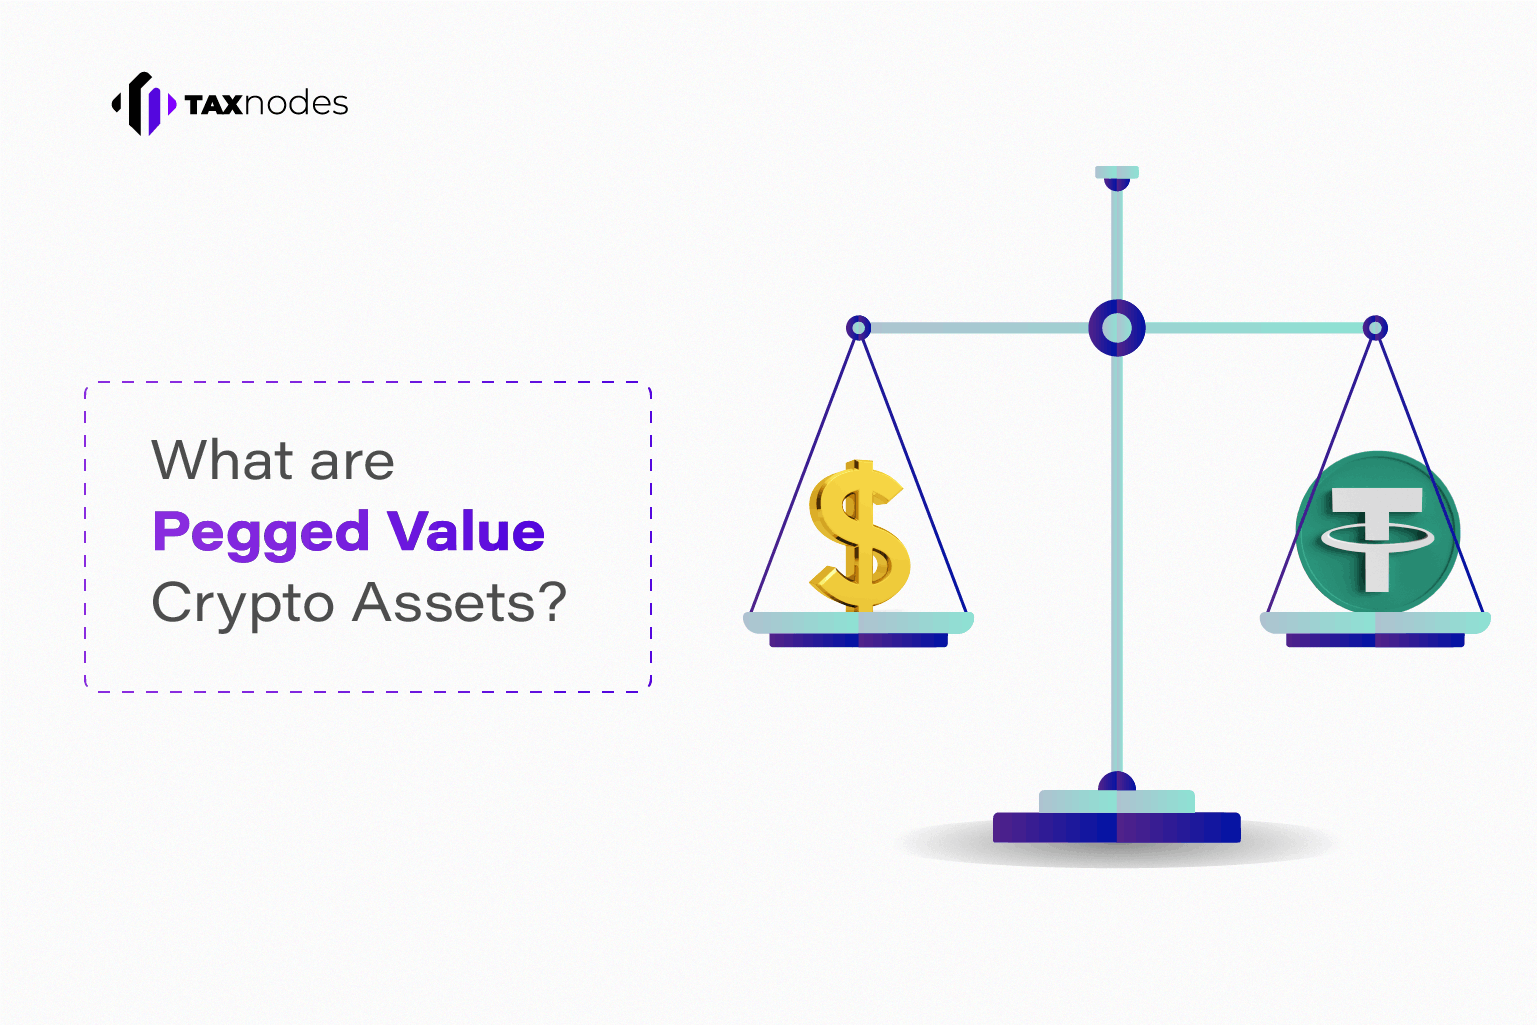 What are Pegged Value Crypto Assets?